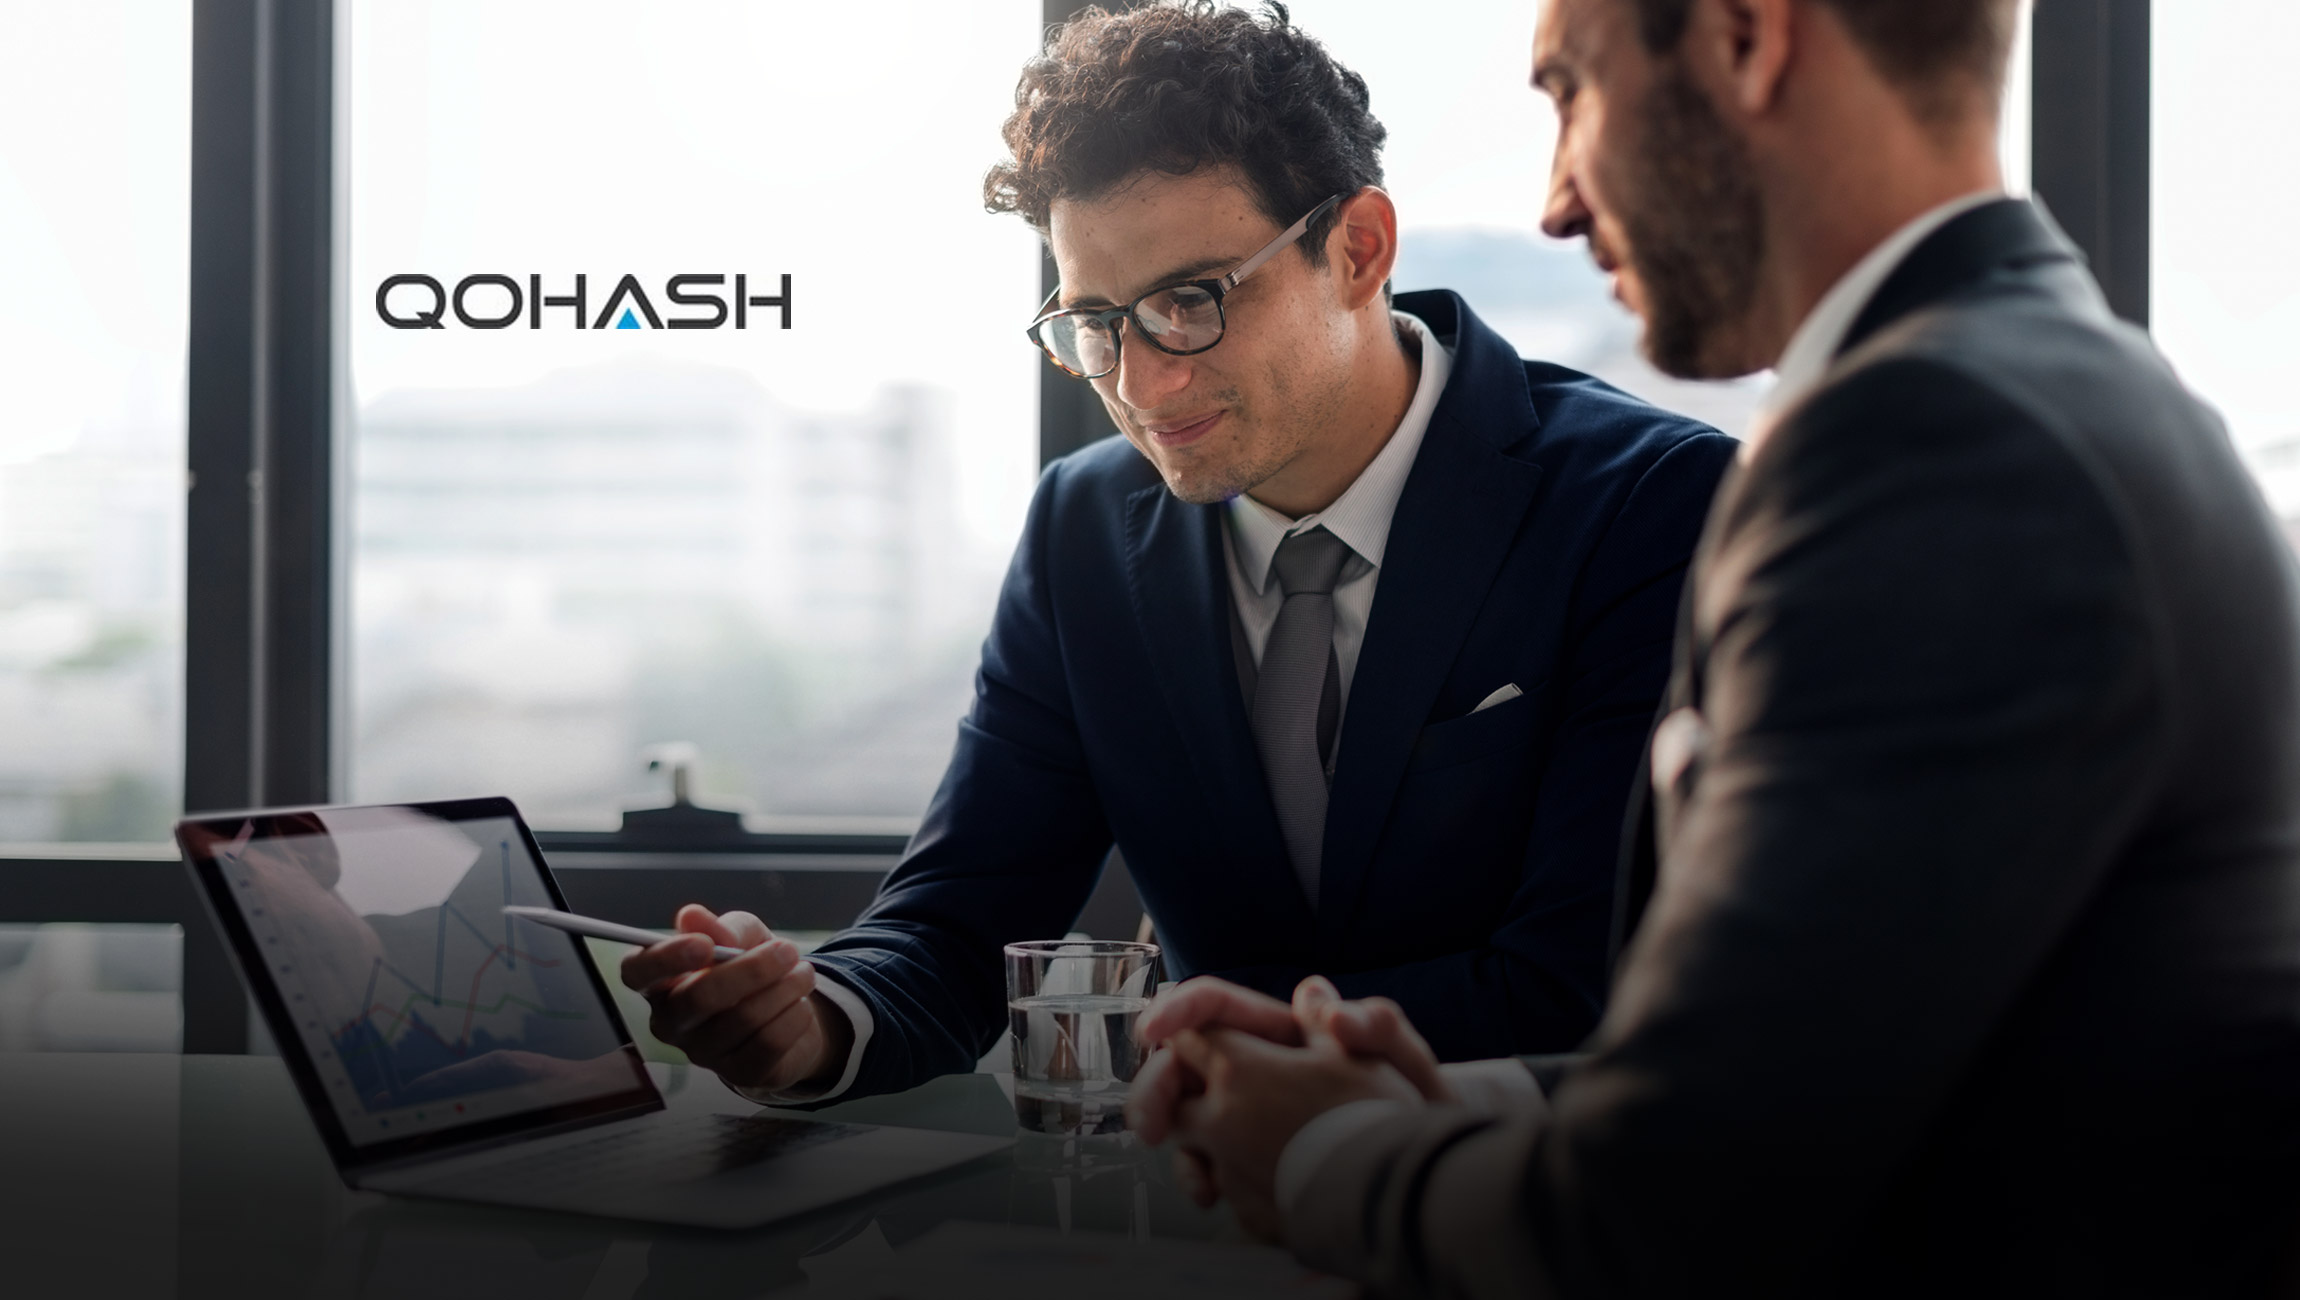 Qohash Secures $8M in Funding With Cutting-Edge Data Security Solutions Helping Companies Stop Global Increase in Data Breaches